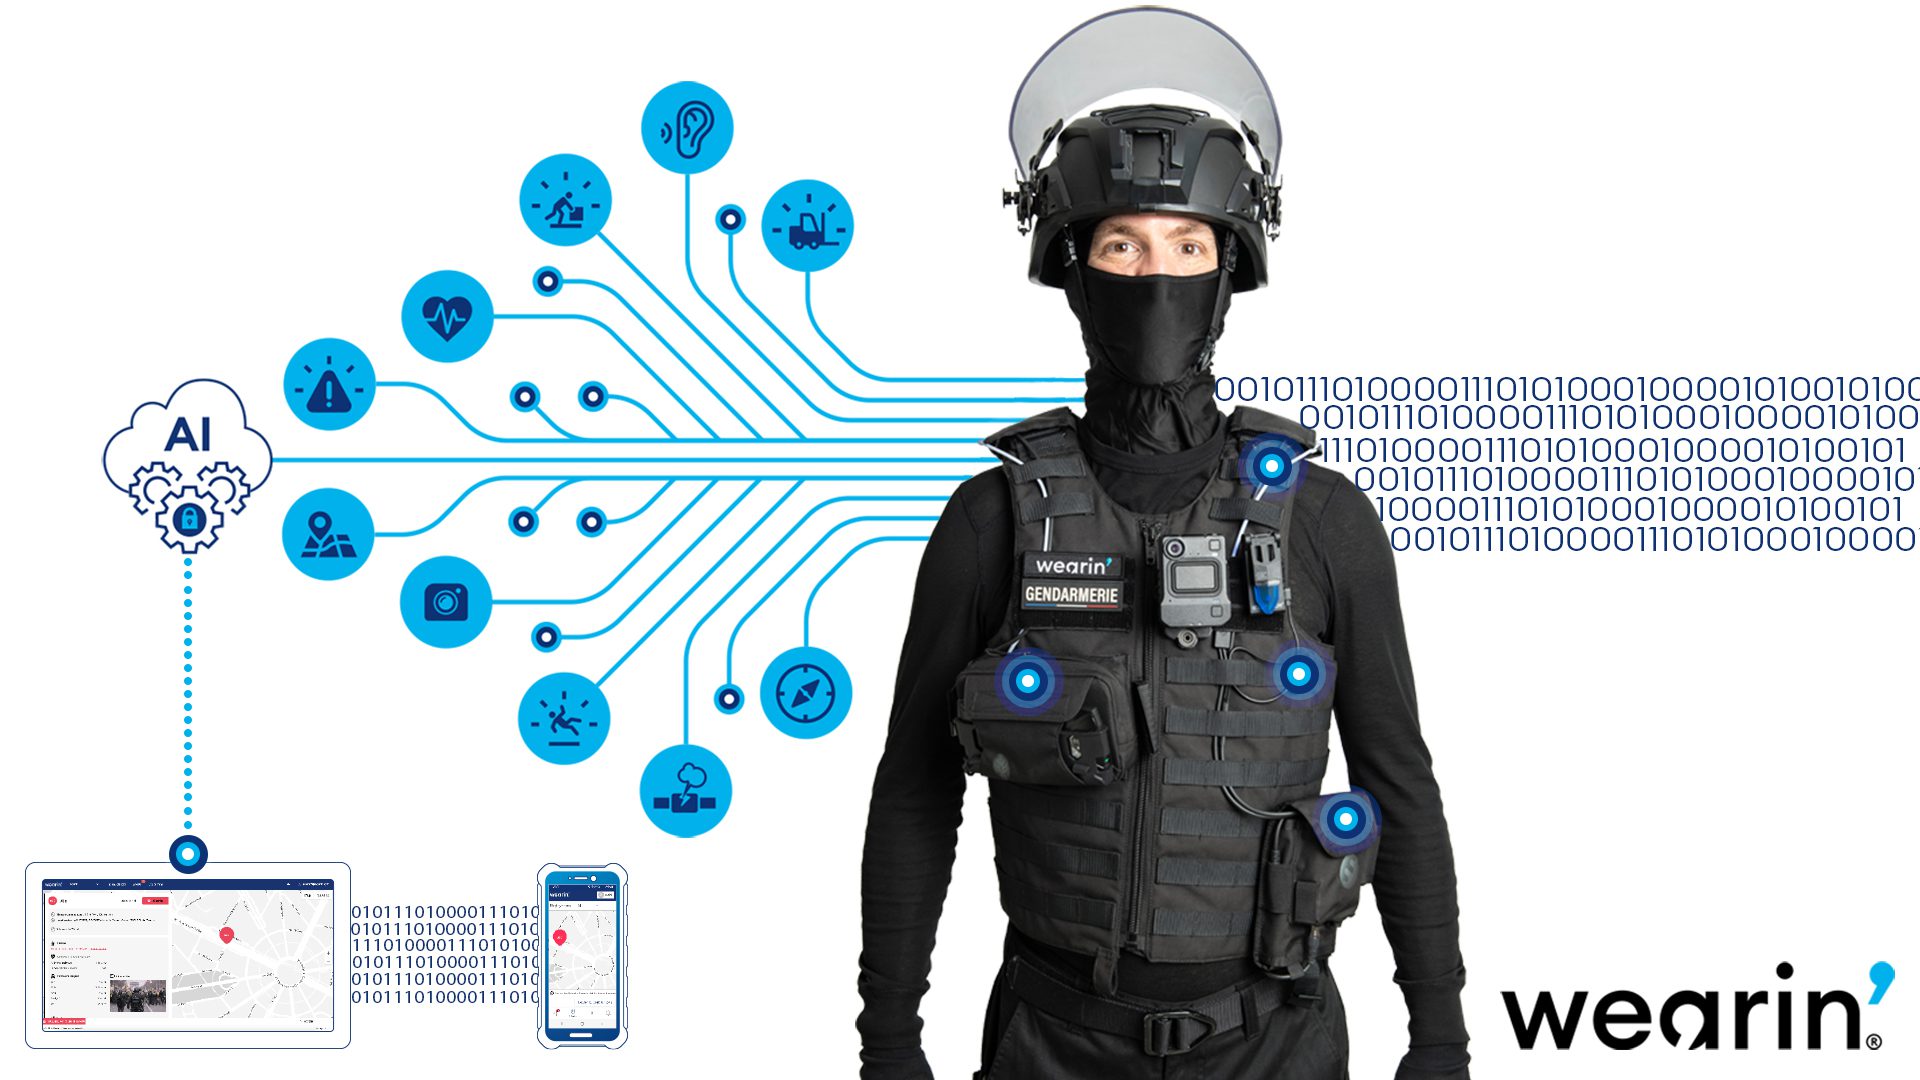 Field-tested by firefighters and law enforcement officers in Europe, the Wearin' IoT solution